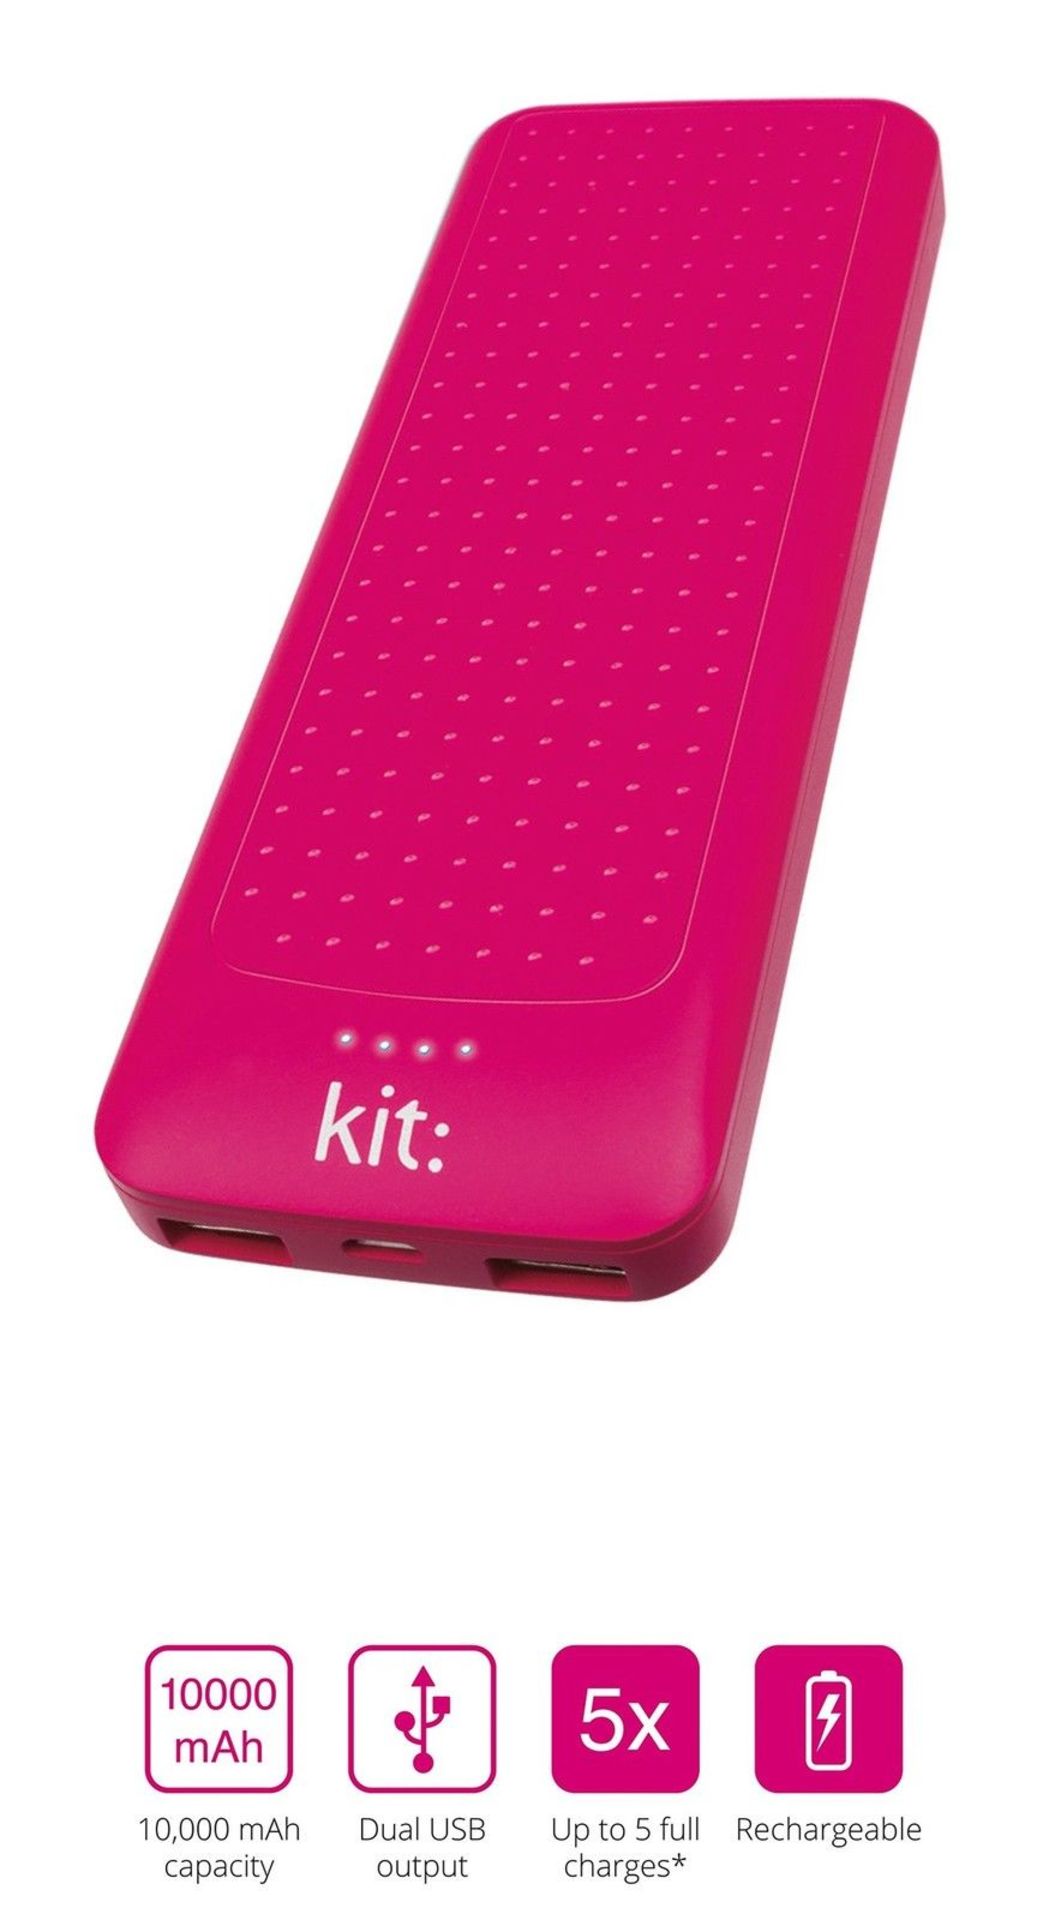 V Brand New Kit Essentials 10000mAh Universal Power Bank with Two USB Ports - Pink - Ebay Price £